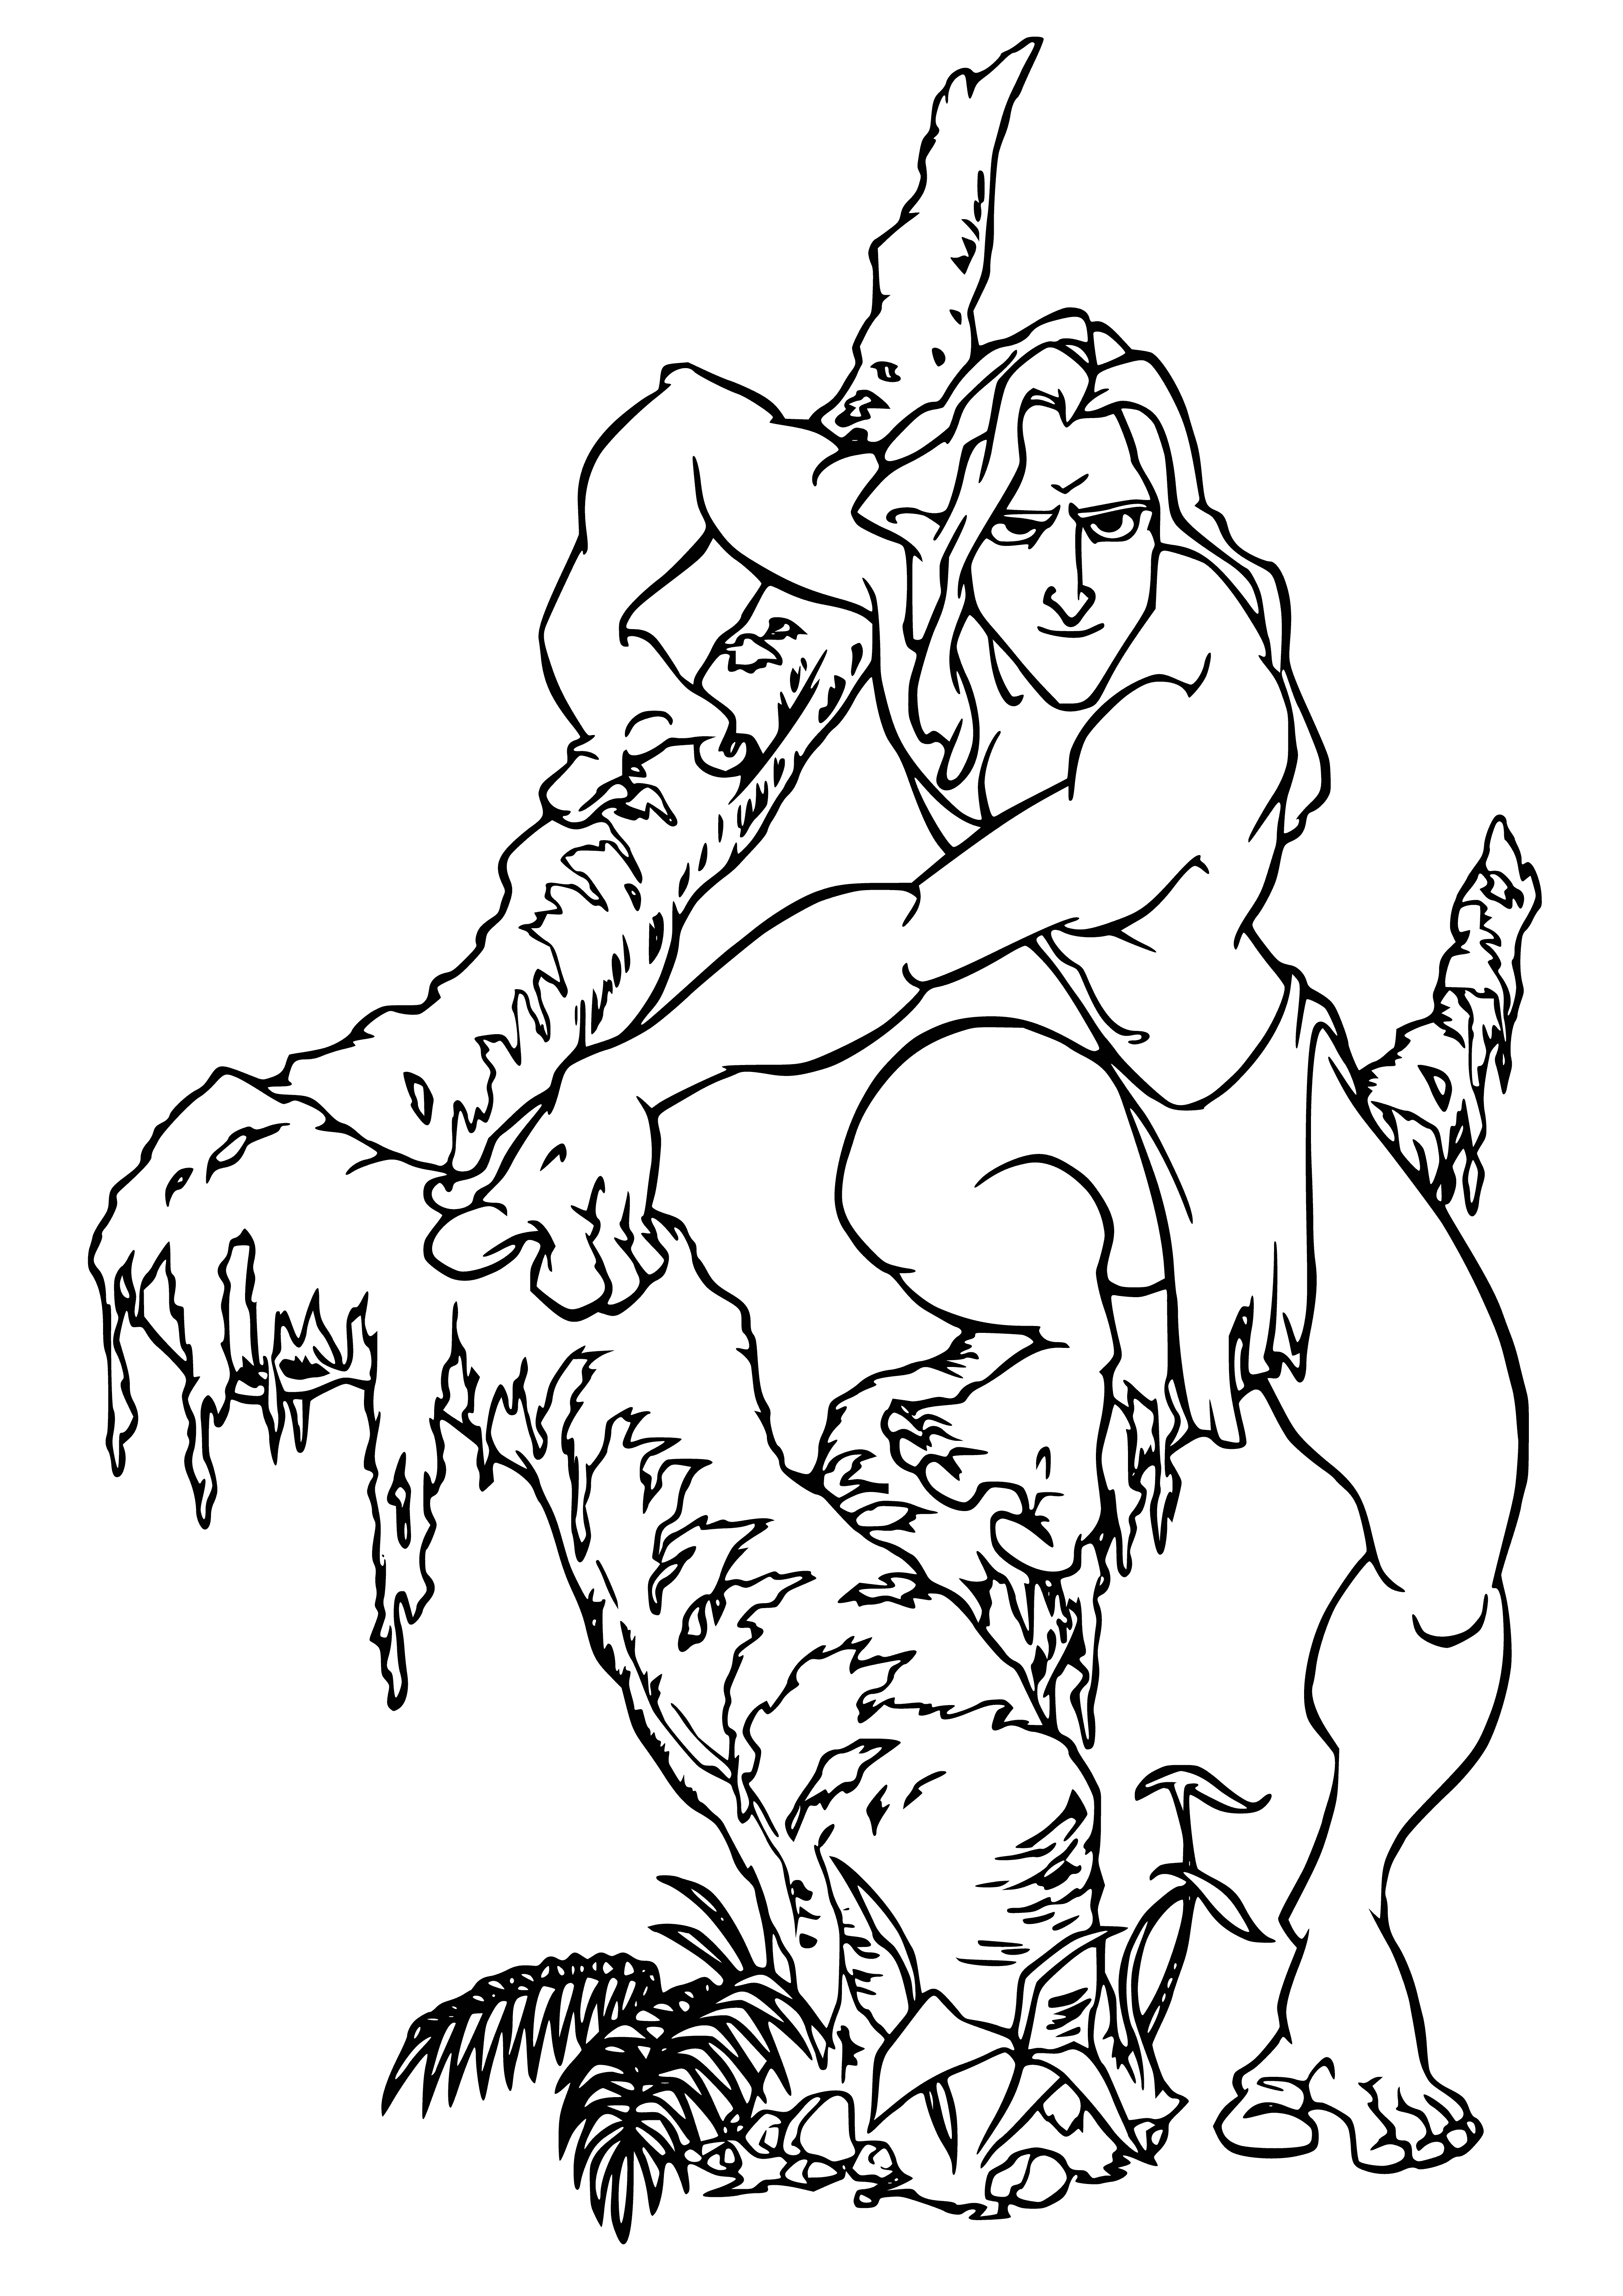 coloring page: Tarzan swings on a vine above animals standing on a tree branch, arms and legs outstretched. He wears a loincloth and has long, flowing hair.